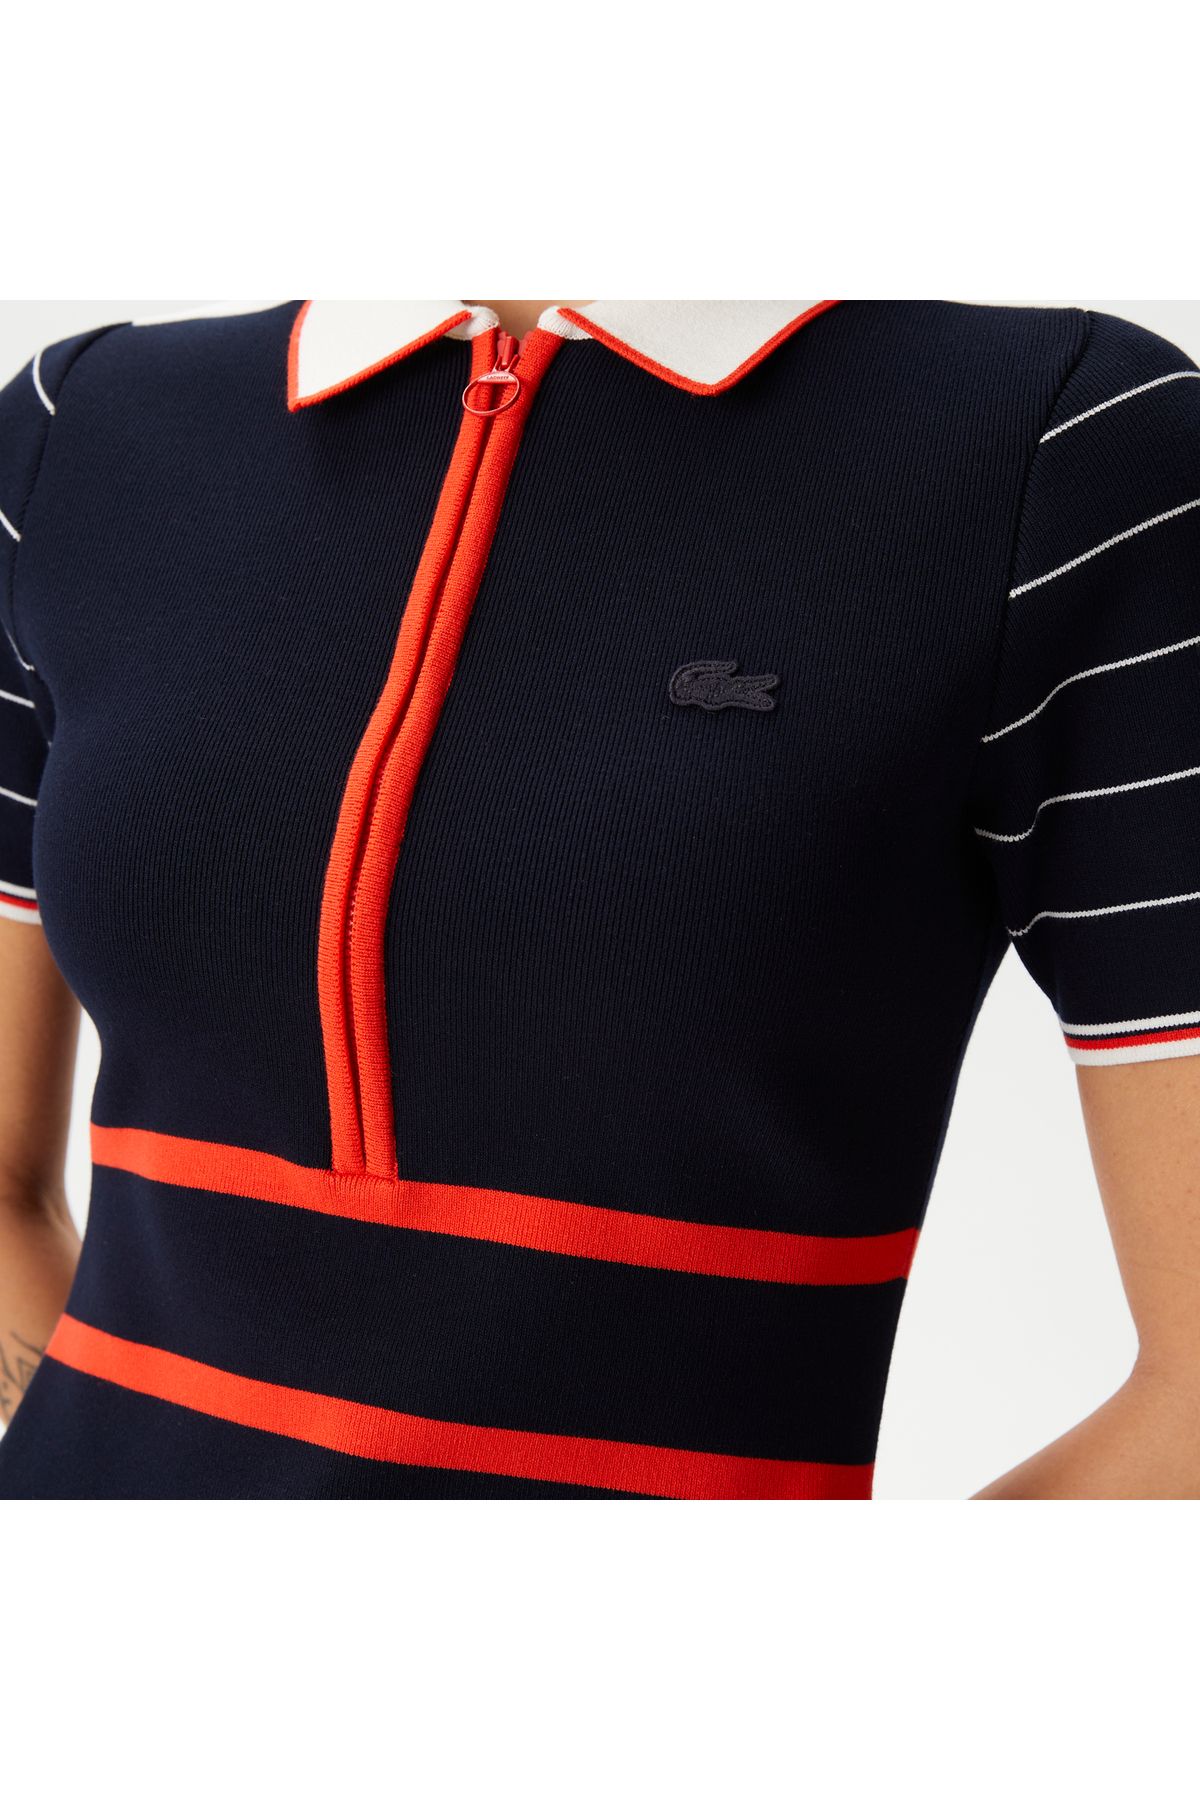 Lacoste Flare Fit Polo Yaka Navy Blue